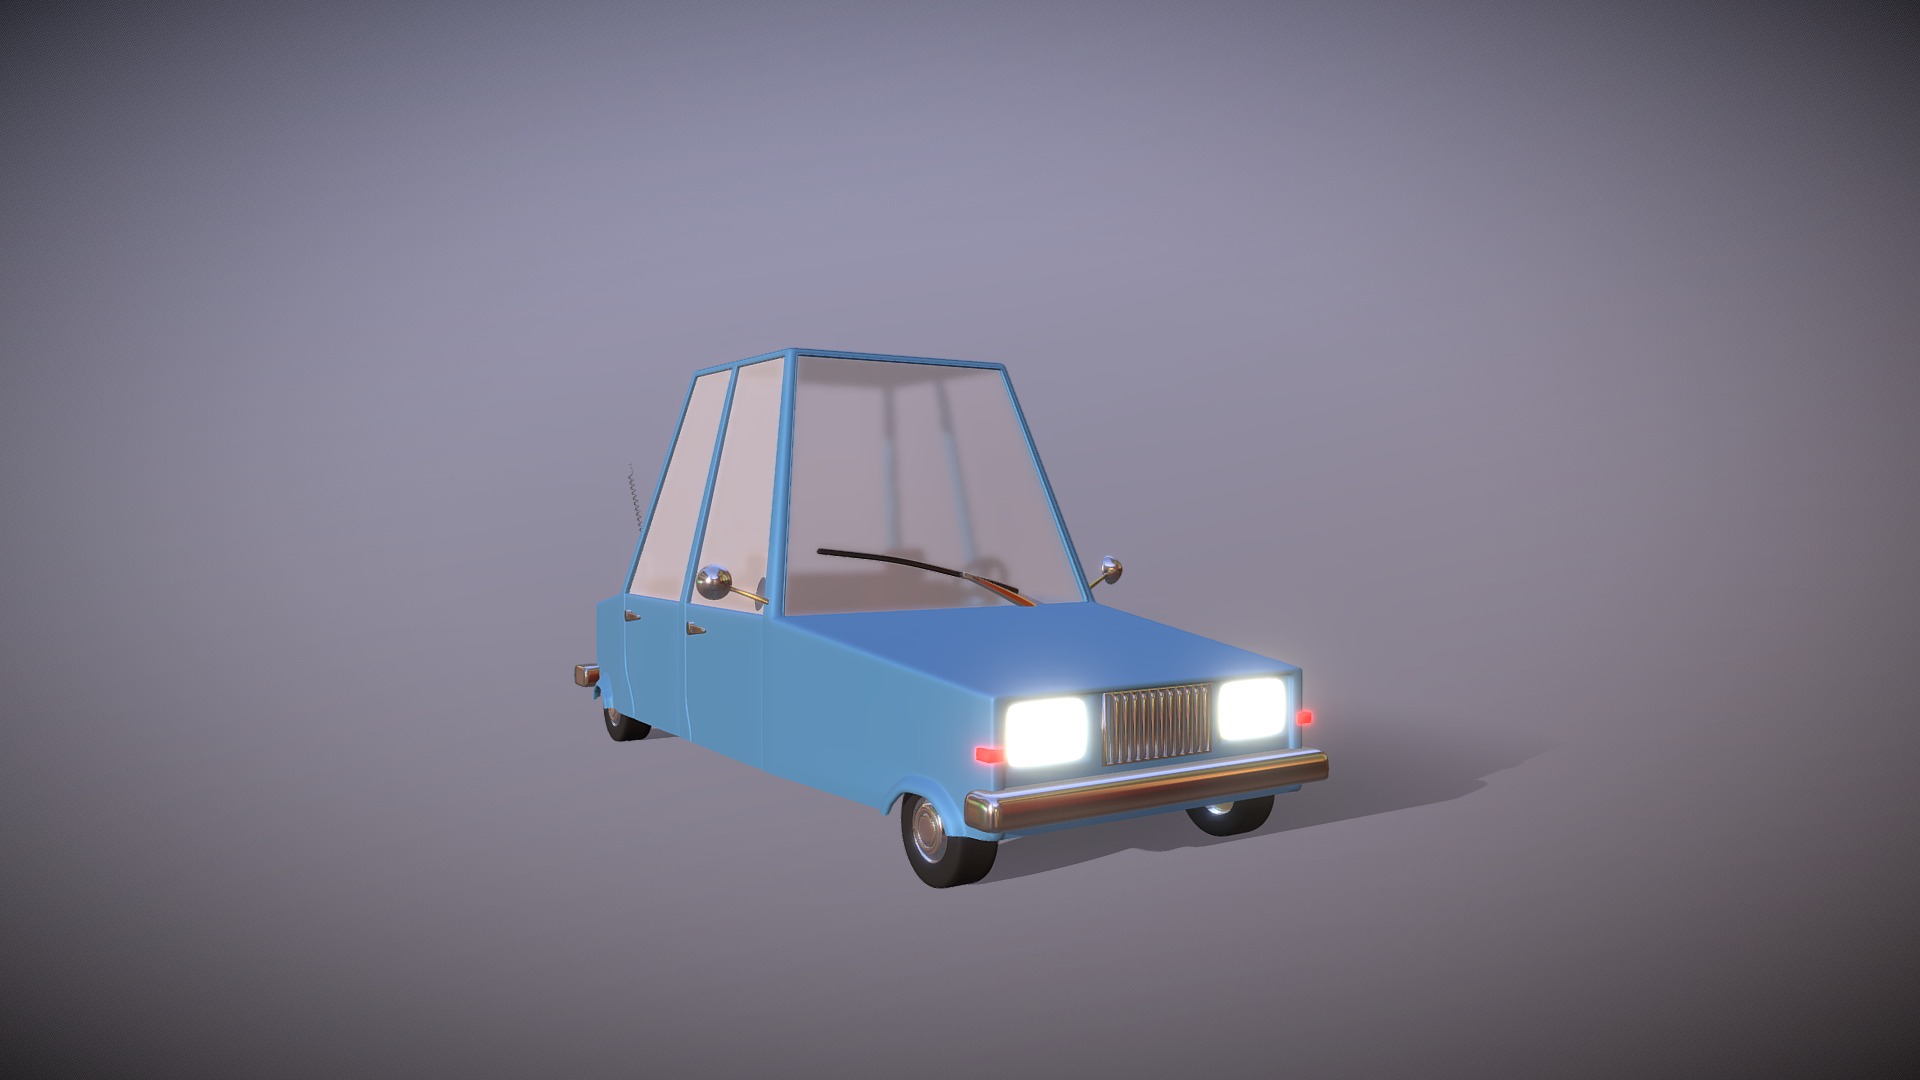 3D model Cartoon Car 2 - This is a 3D model of the Cartoon Car 2. The 3D model is about a blue car with a white roof.